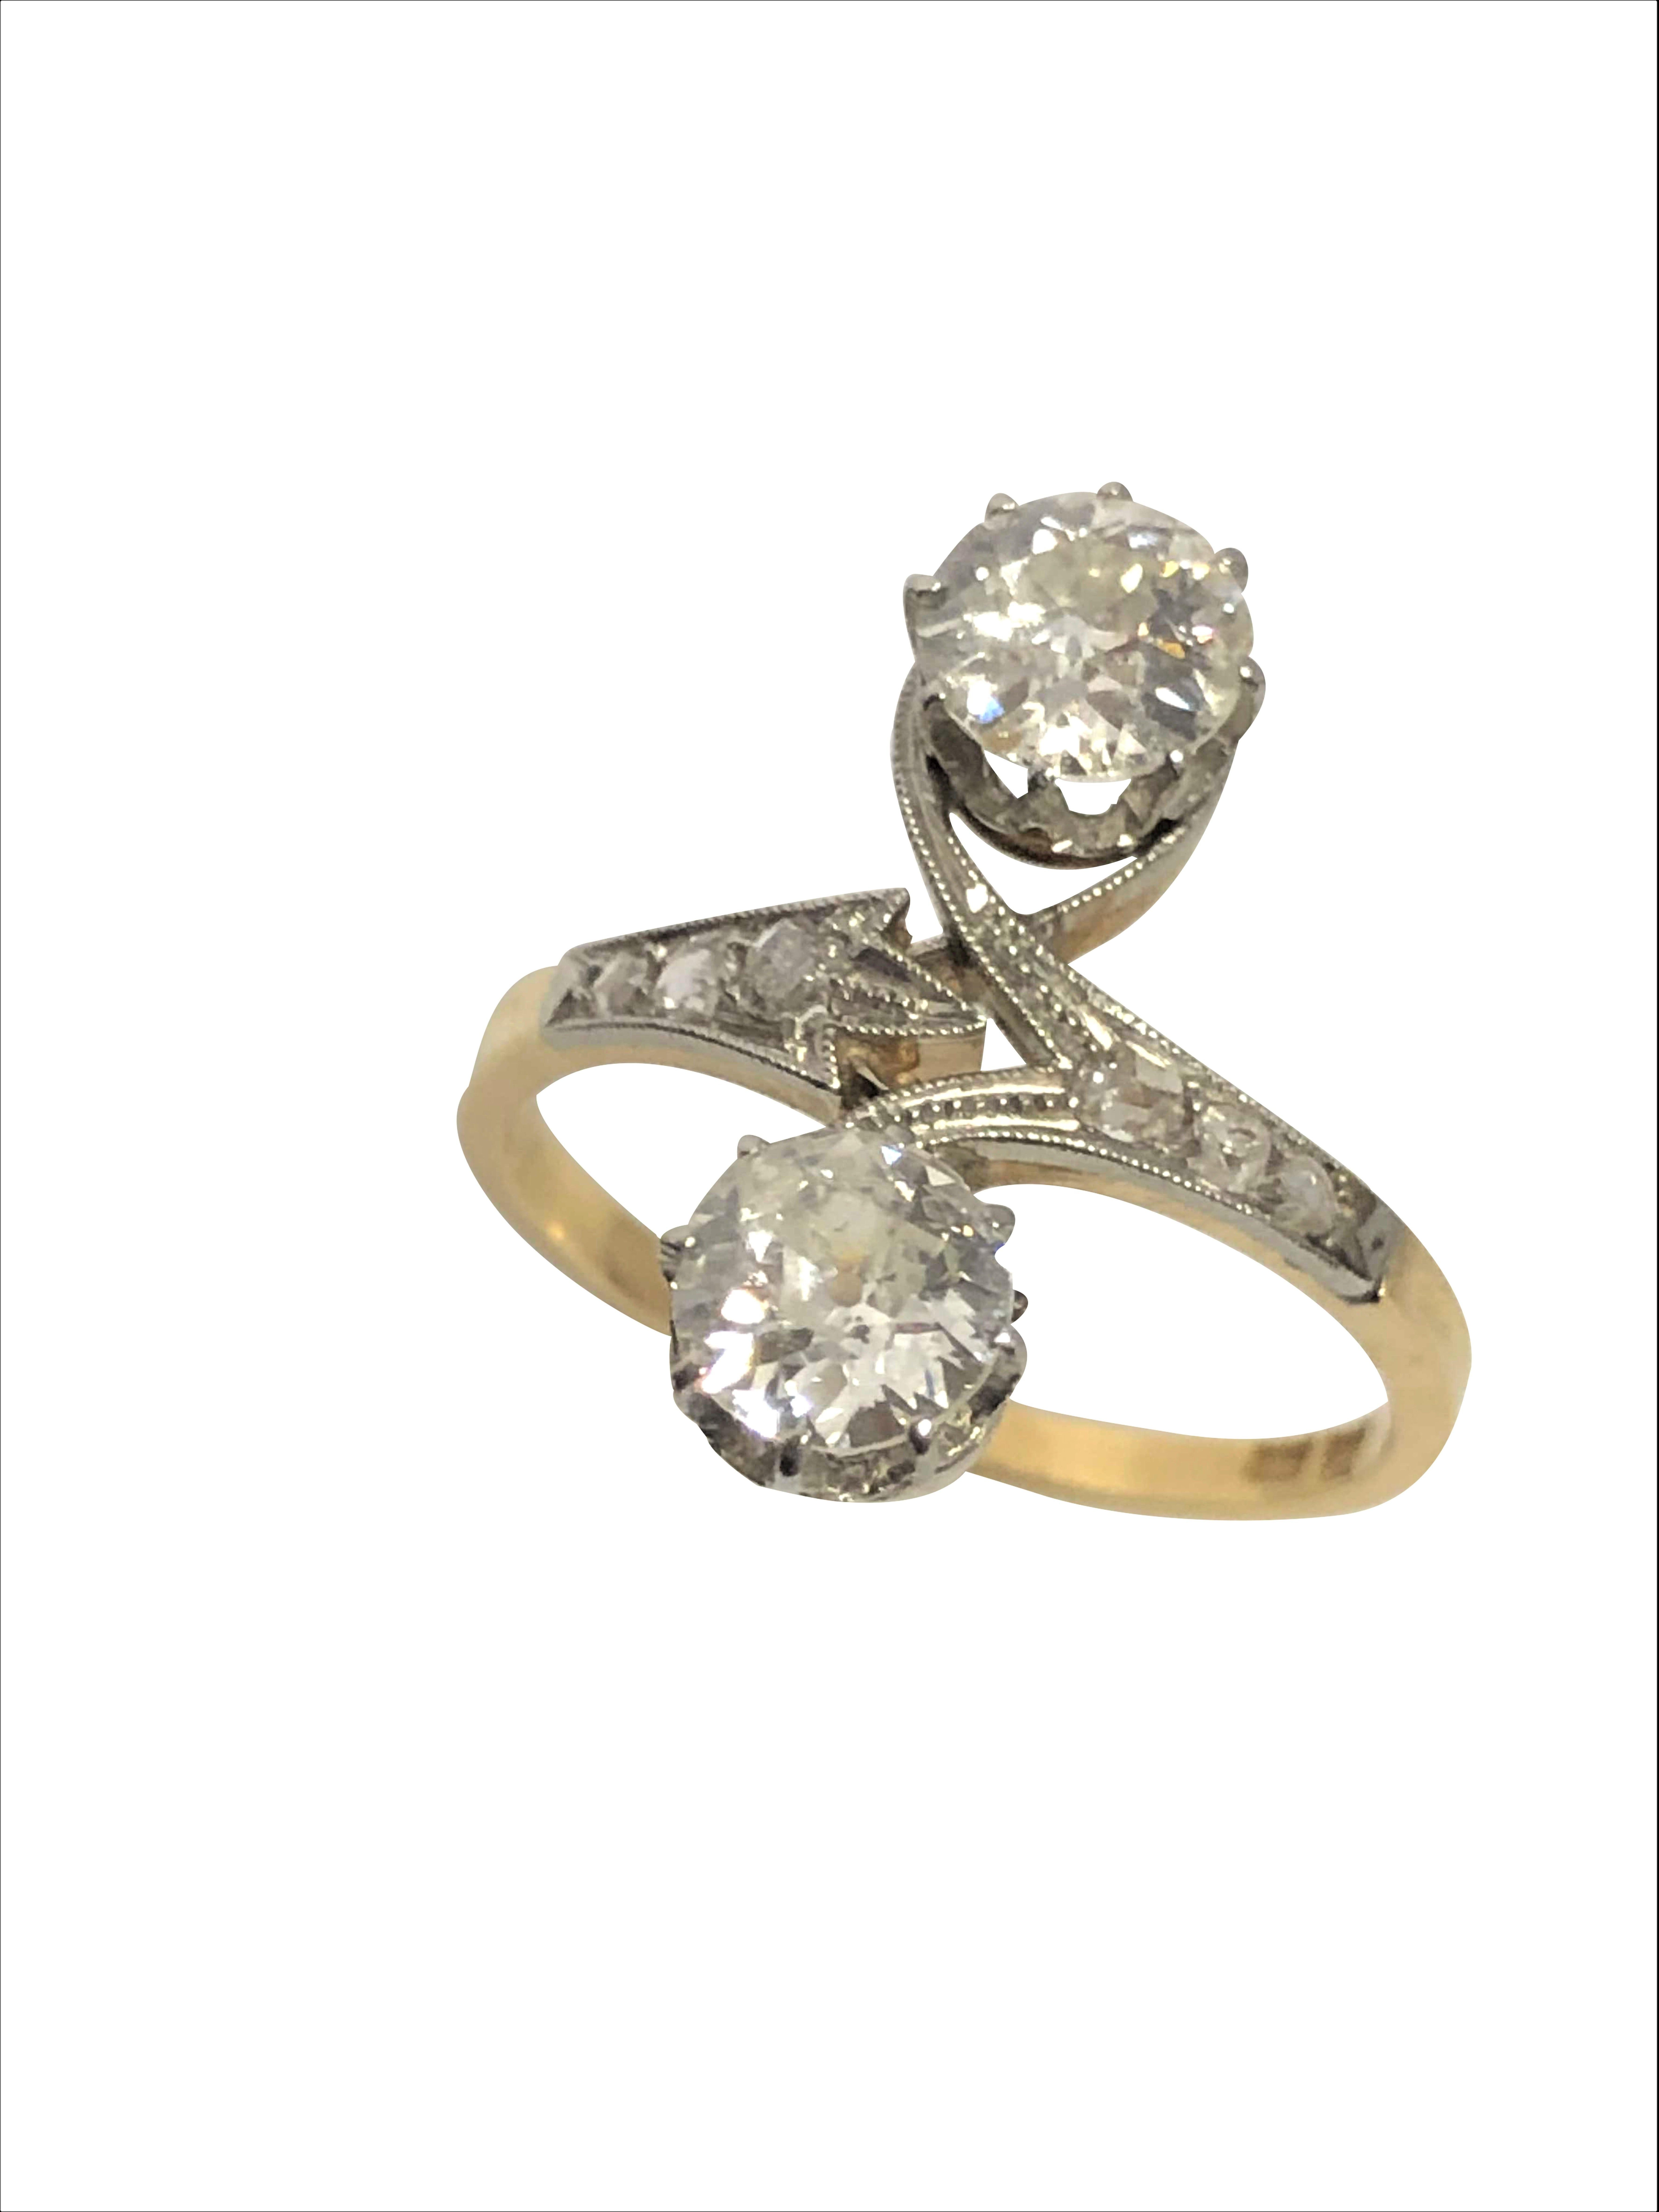 Circa 1910 Platinum top and 18k yellow Gold Ring, set with two old Mine cut Diamonds totaling 1.50 Carats and further set with several Rose cut Diamonds, the Diamonds grade as H in Color and SI in Clarity. Finger size 6 1/2. Excellent, seldom worn